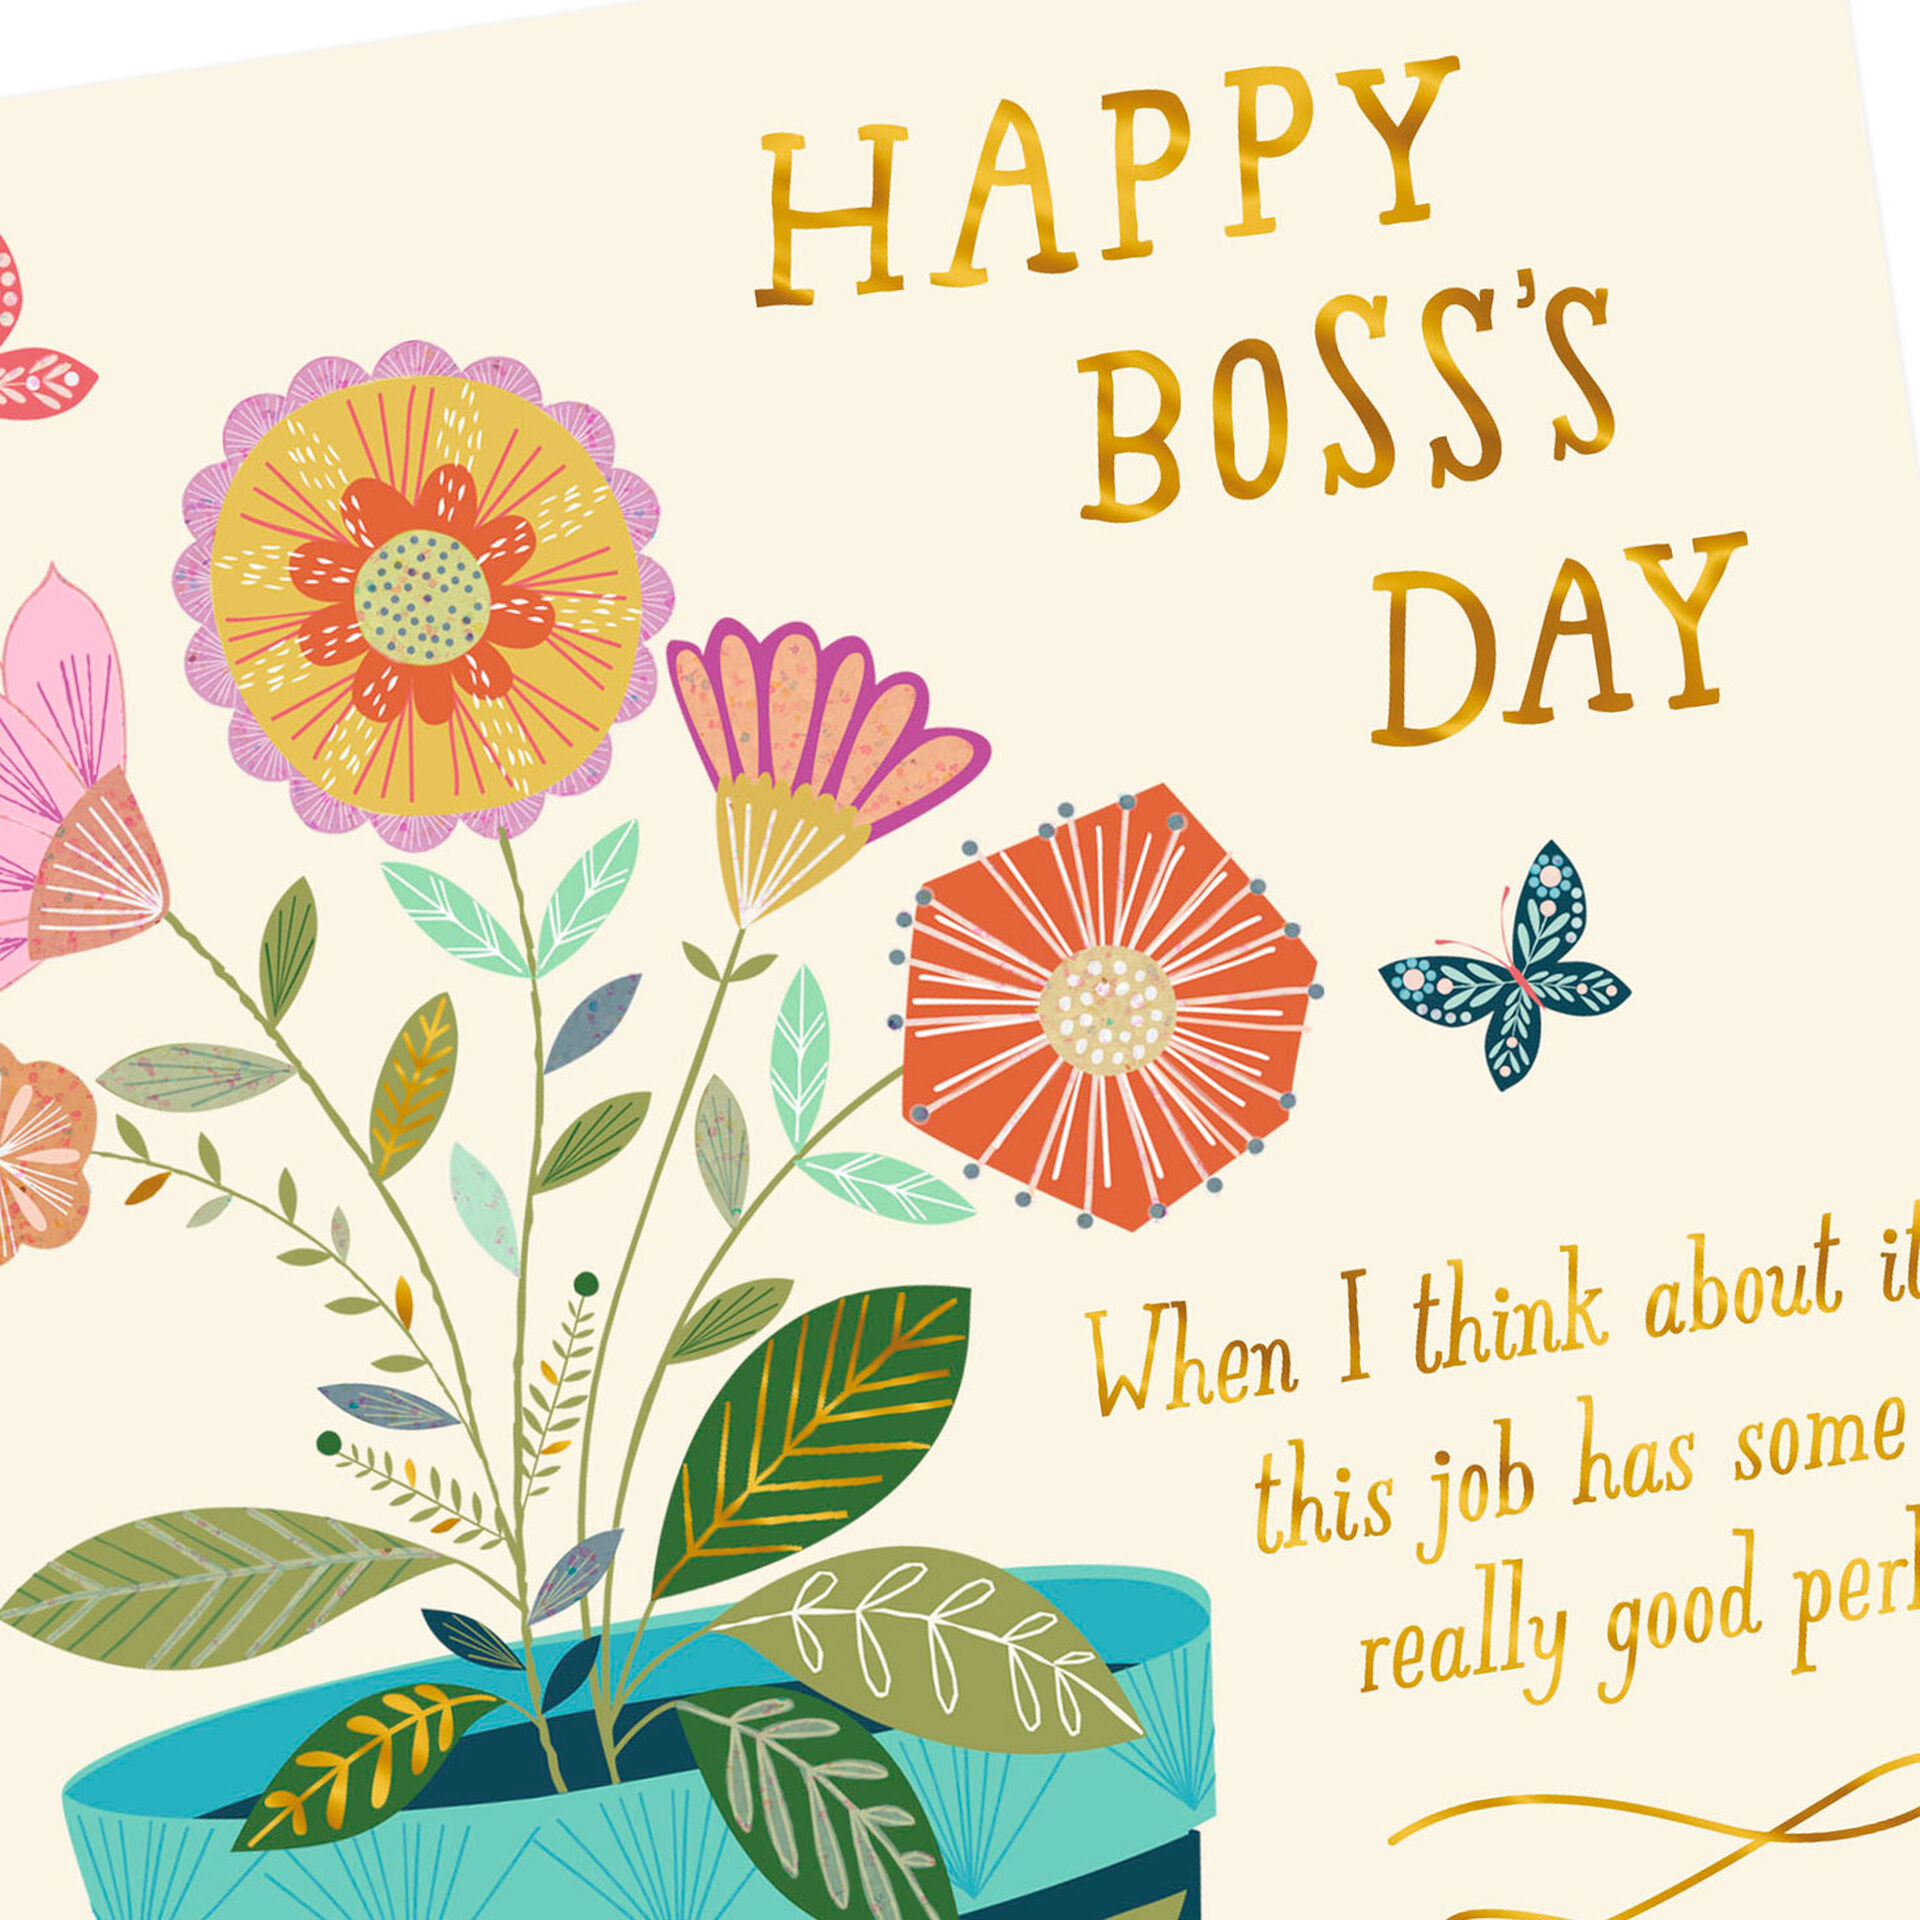 100-boss-day-quotes-wishes-and-messages-wishesmsg-abc-patient